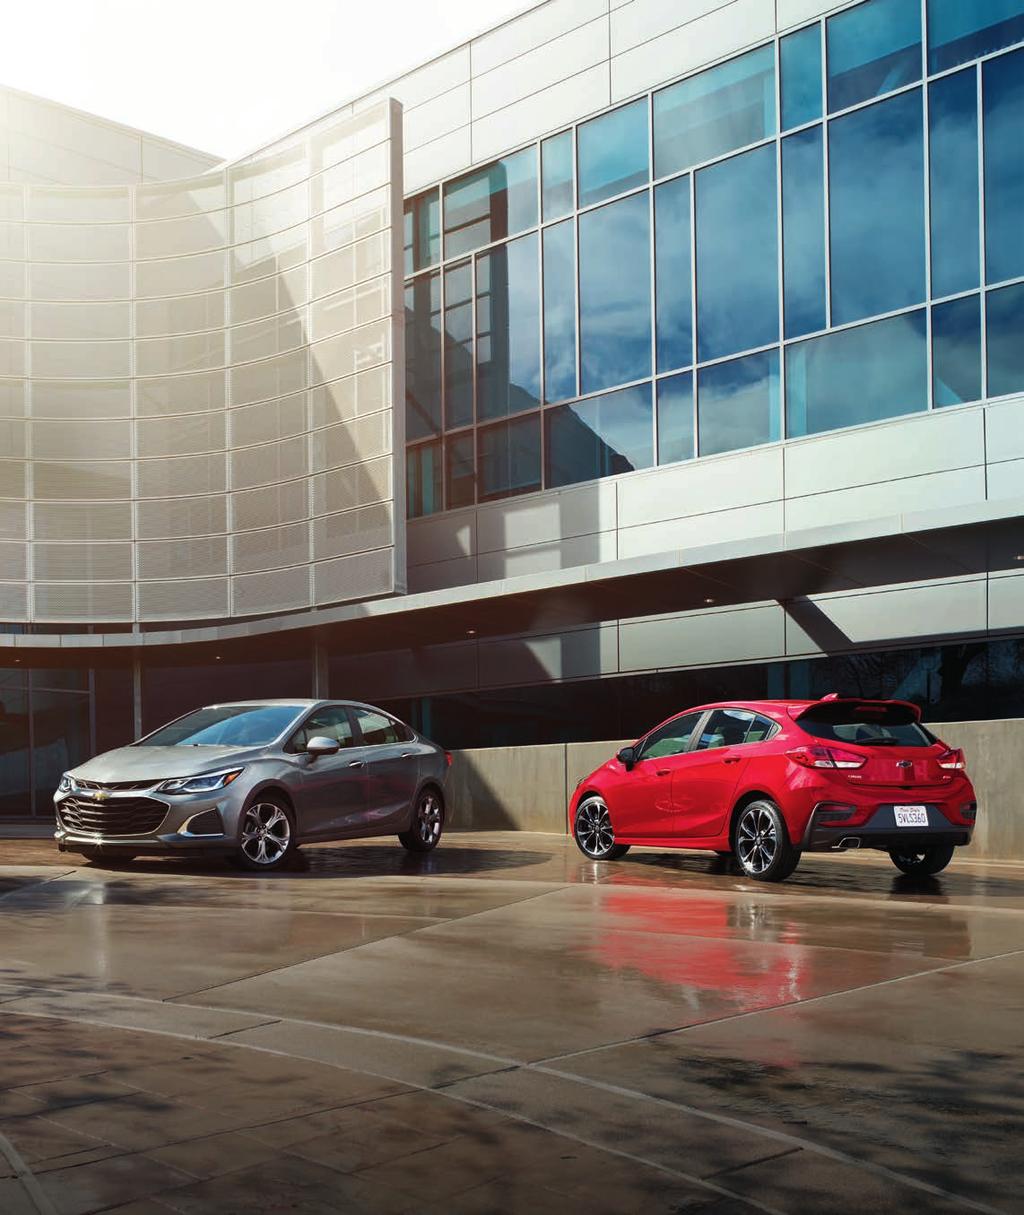 Cruze Premier Sedan in Satin Steel Gray Metallic and Cruze Premier Hatchback in Red Hot with available RS Package. ESCAPE THE ORDINARY AND GO THE DISTANCE.